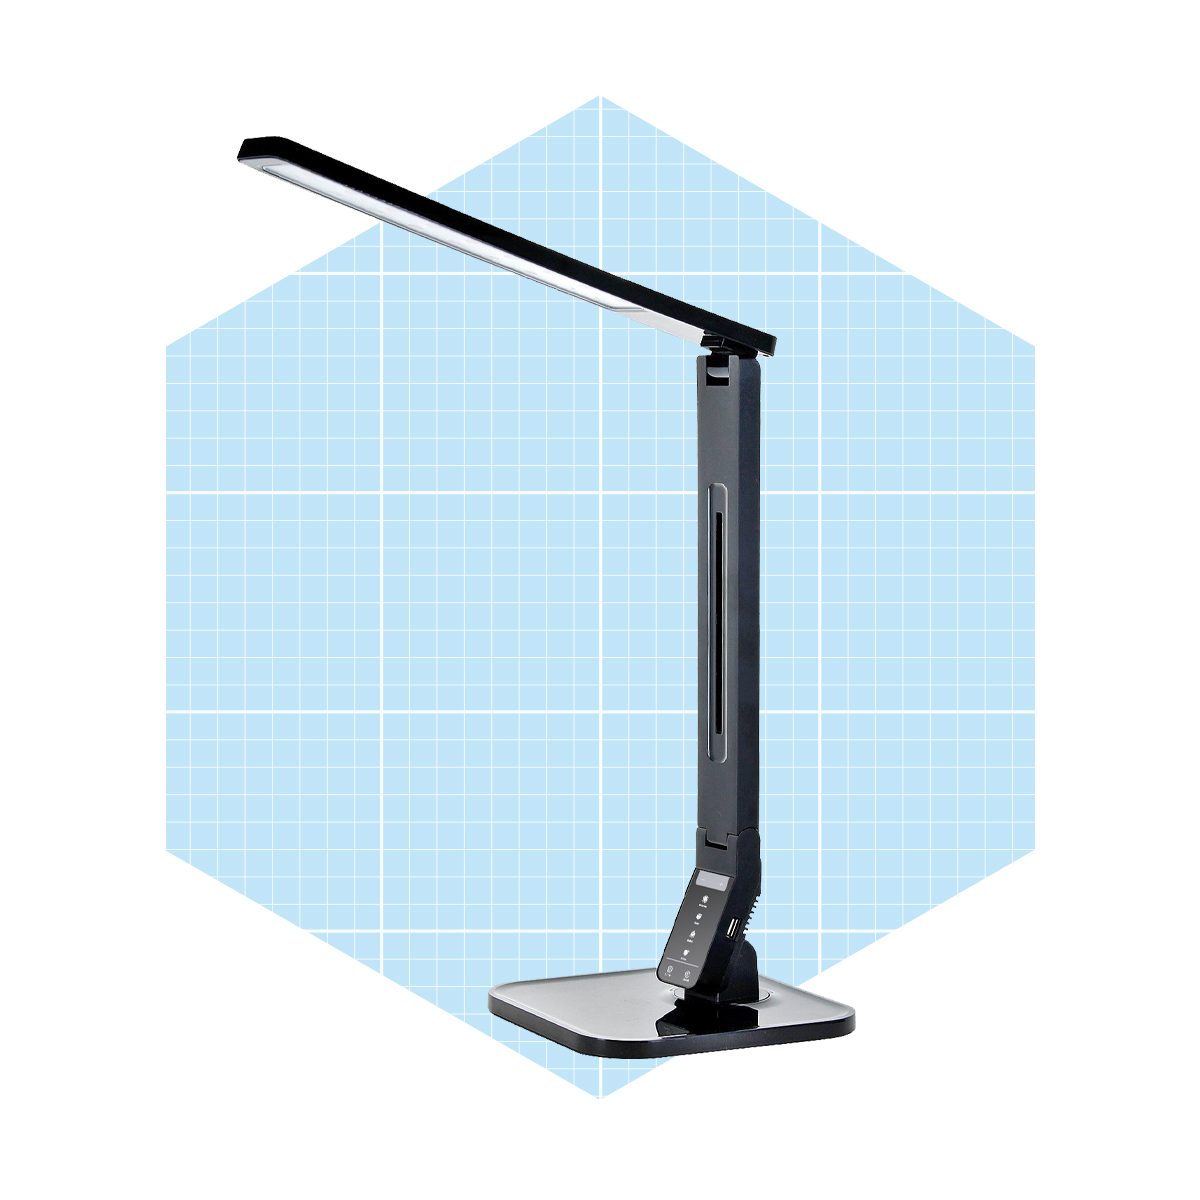 Tenergy 11w Dimmable Led Desk Lamp With Usb Charging Port Ecomm Walmart.com